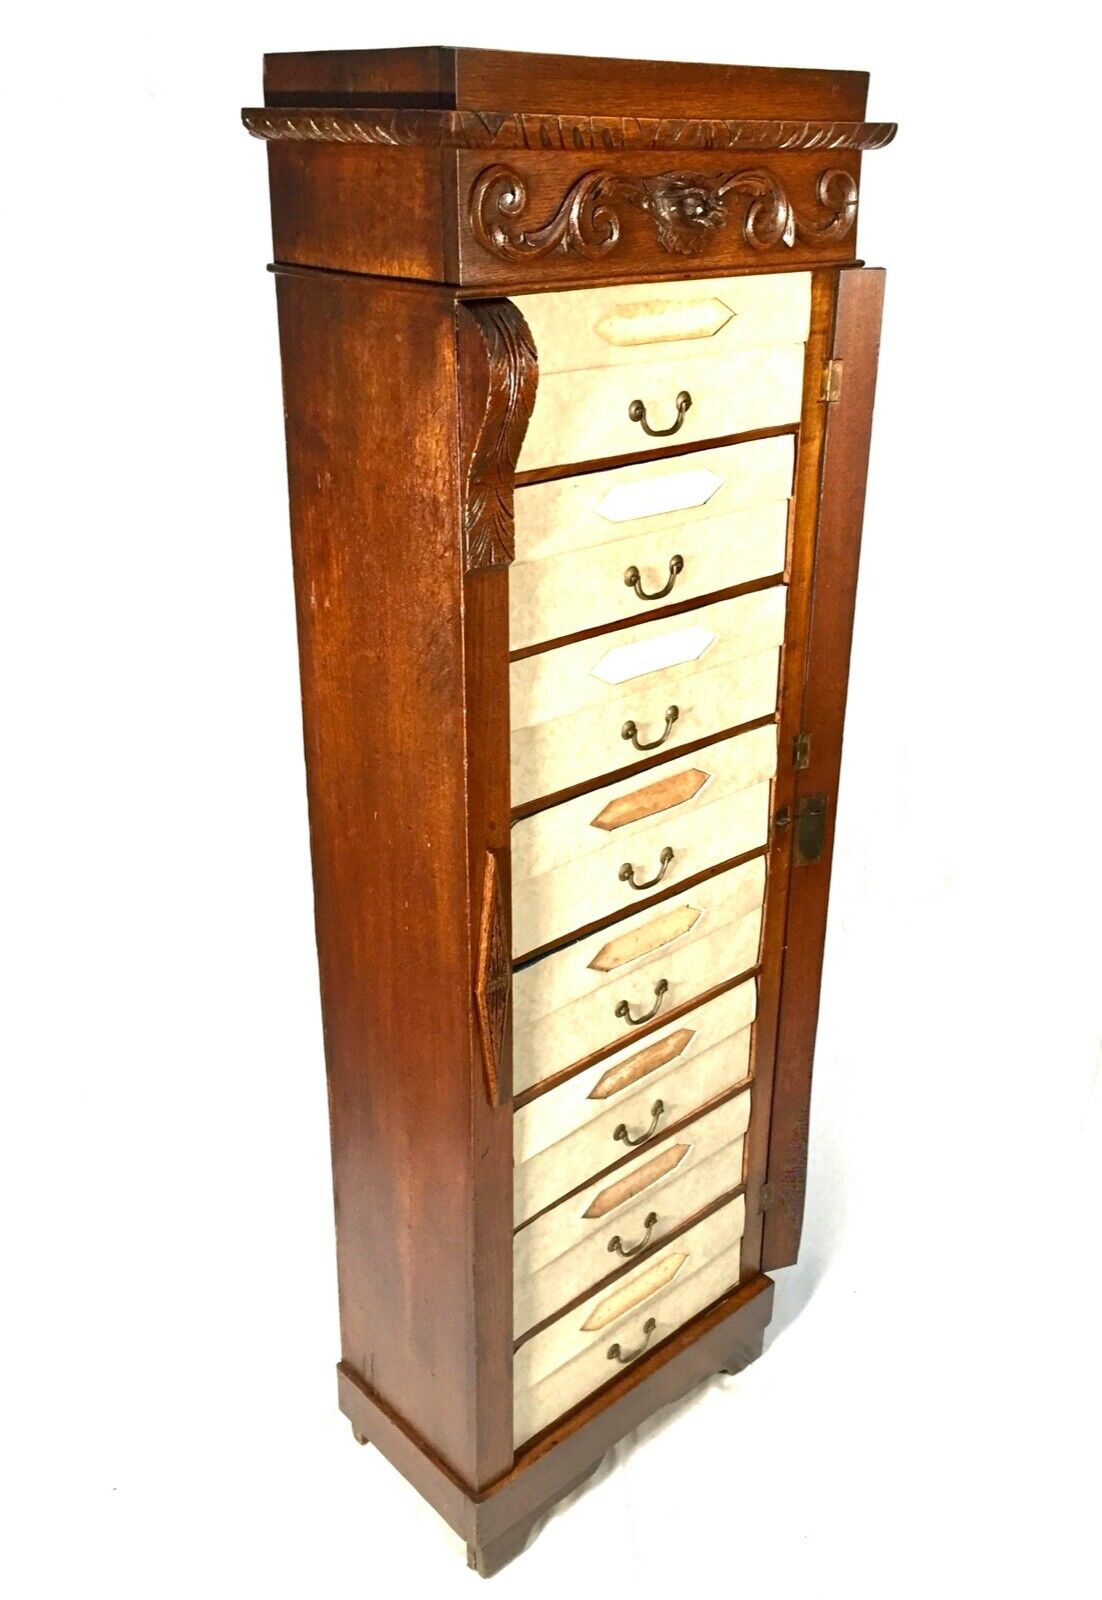 Antique Oak French Filing Cabinet / Chest of Drawers / Cartonnier / 19th Century